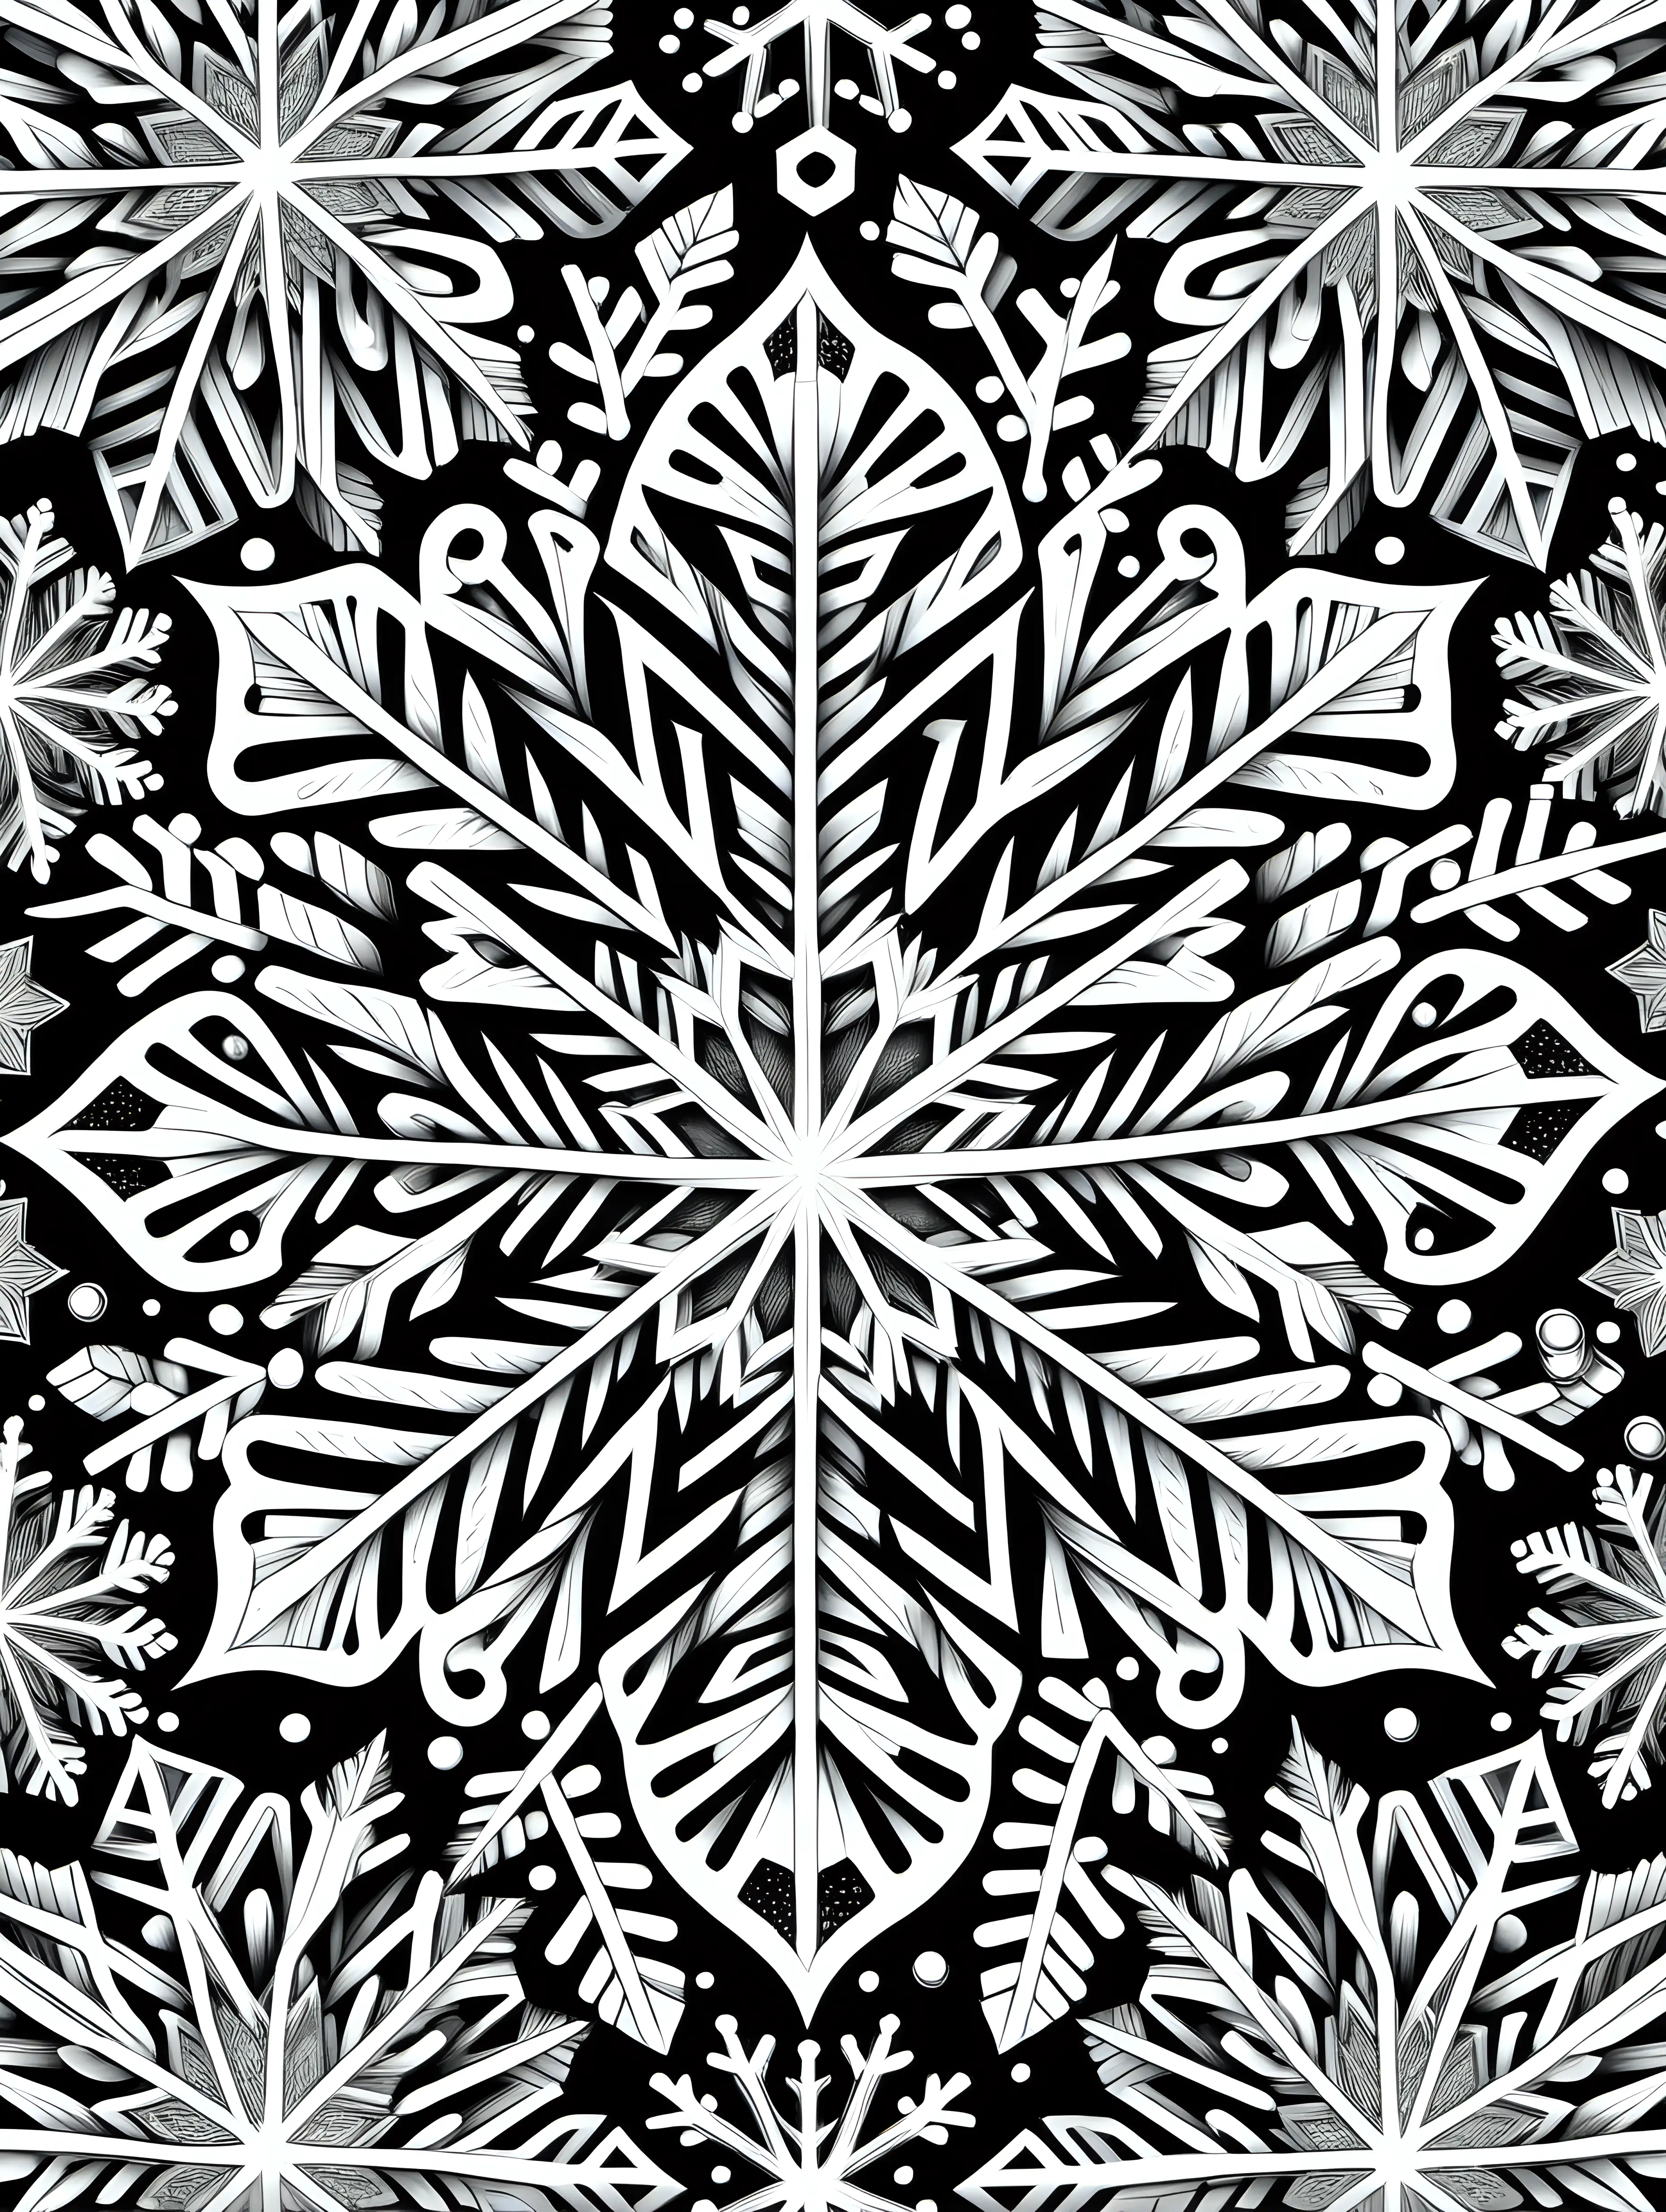 Exquisite 2D Vector Coloring Page for Adults Featuring 100 Intricate Snowflakes